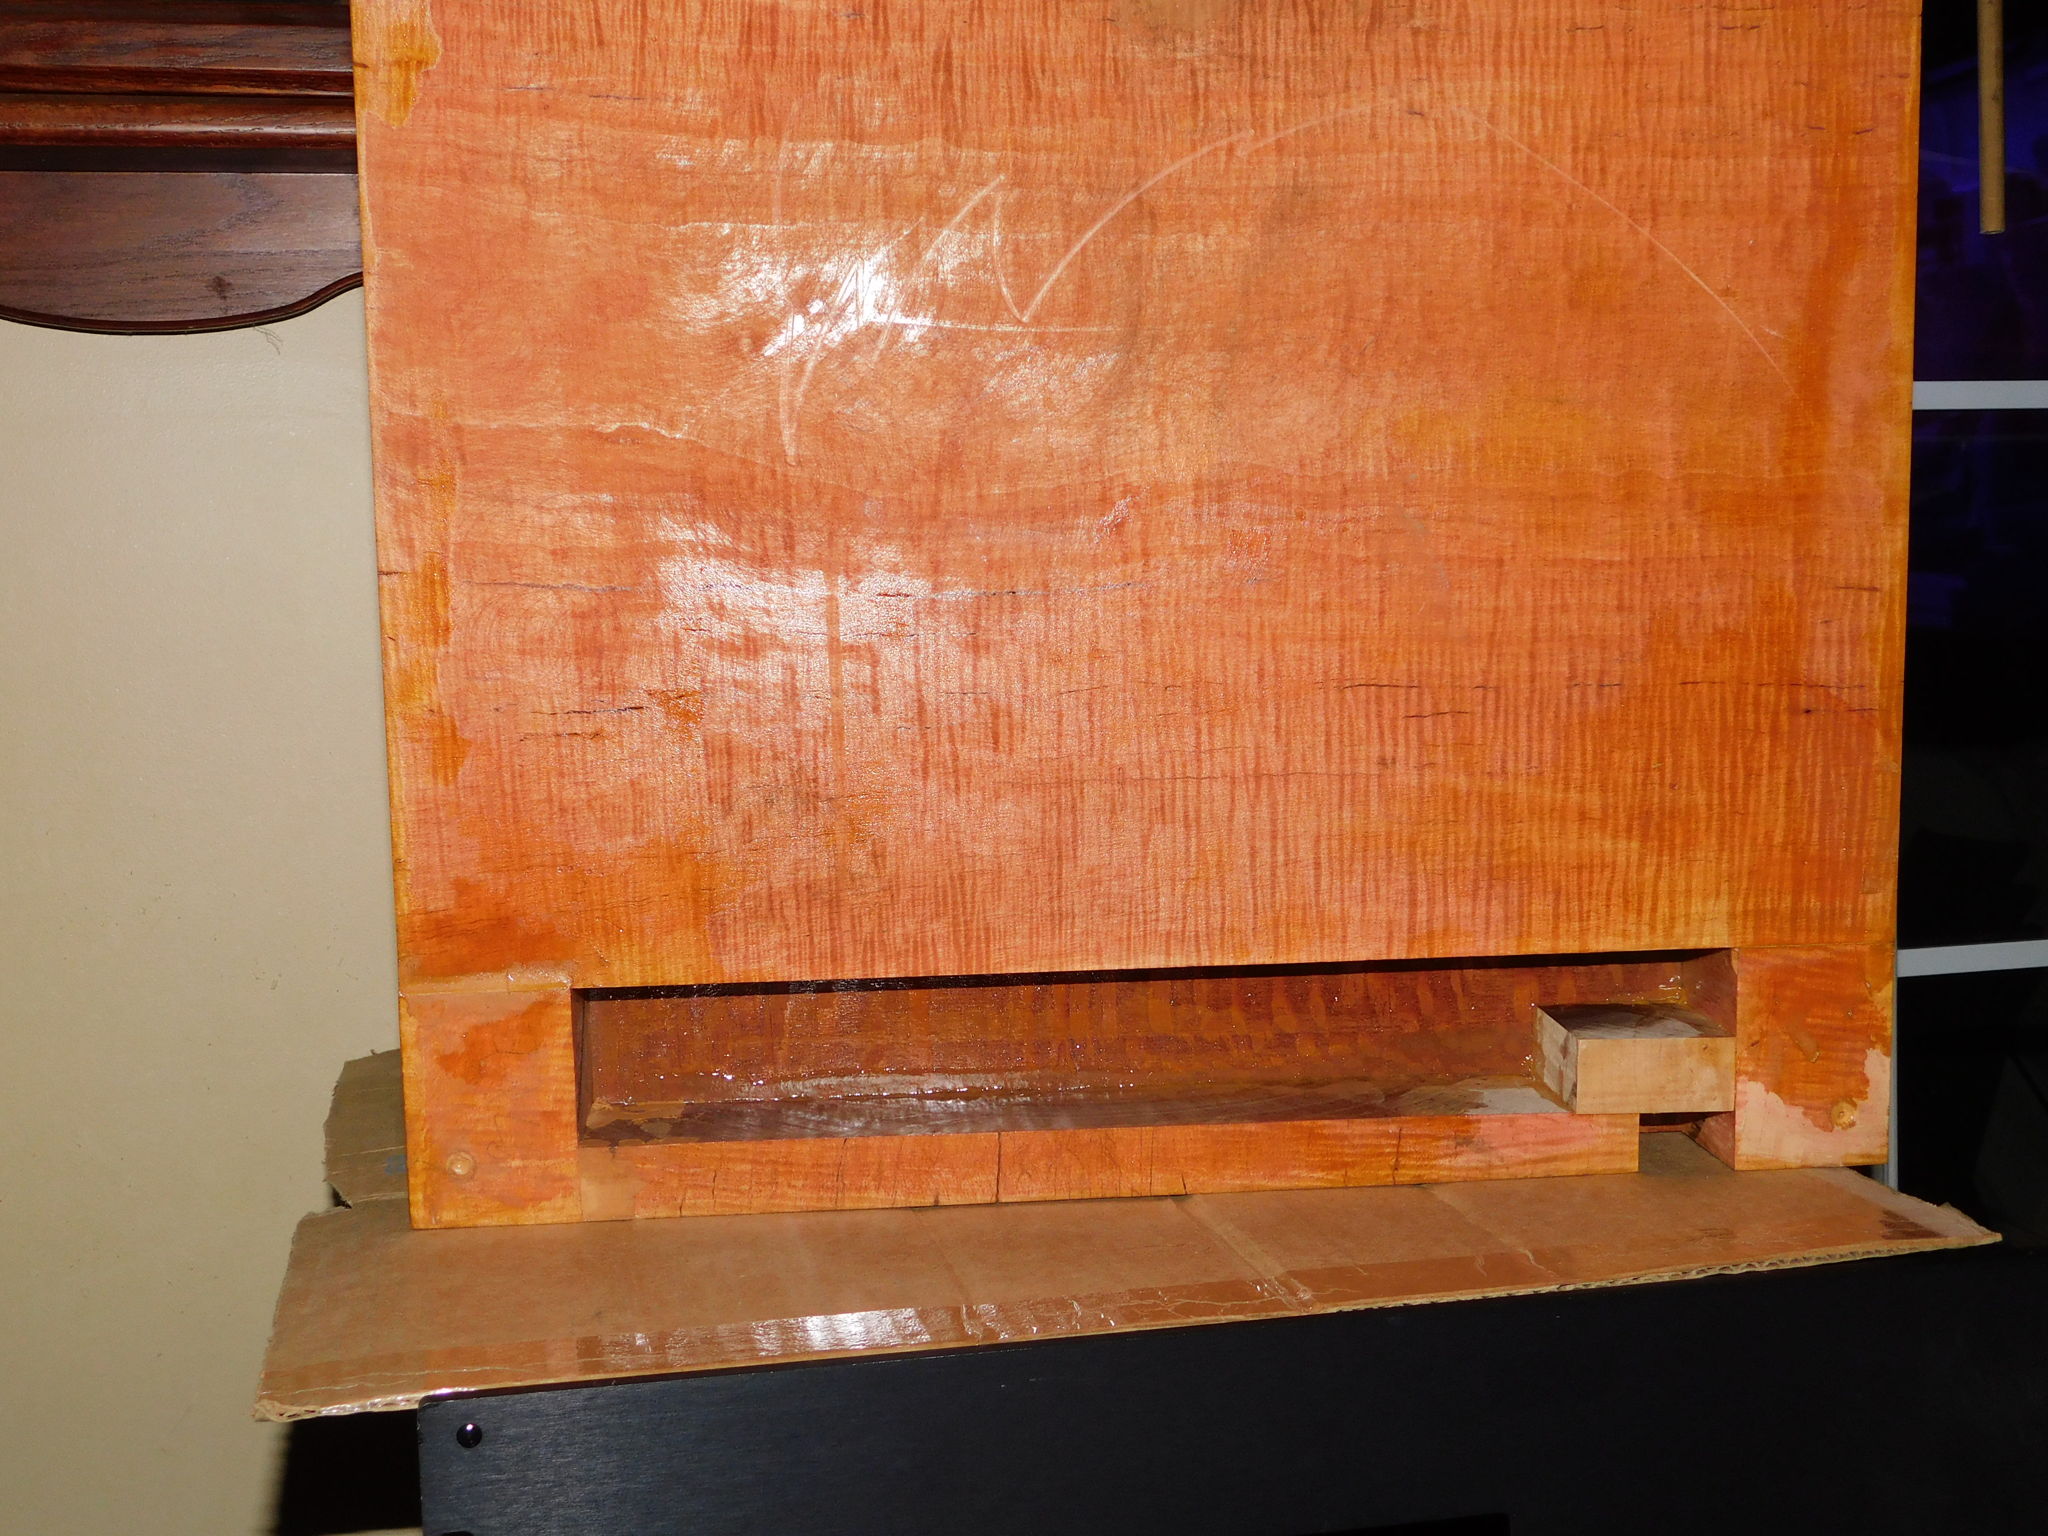 Leopardwood topped isolation plinth. Showing what shall become the easily accessible/tuneable, void for sand/shot.